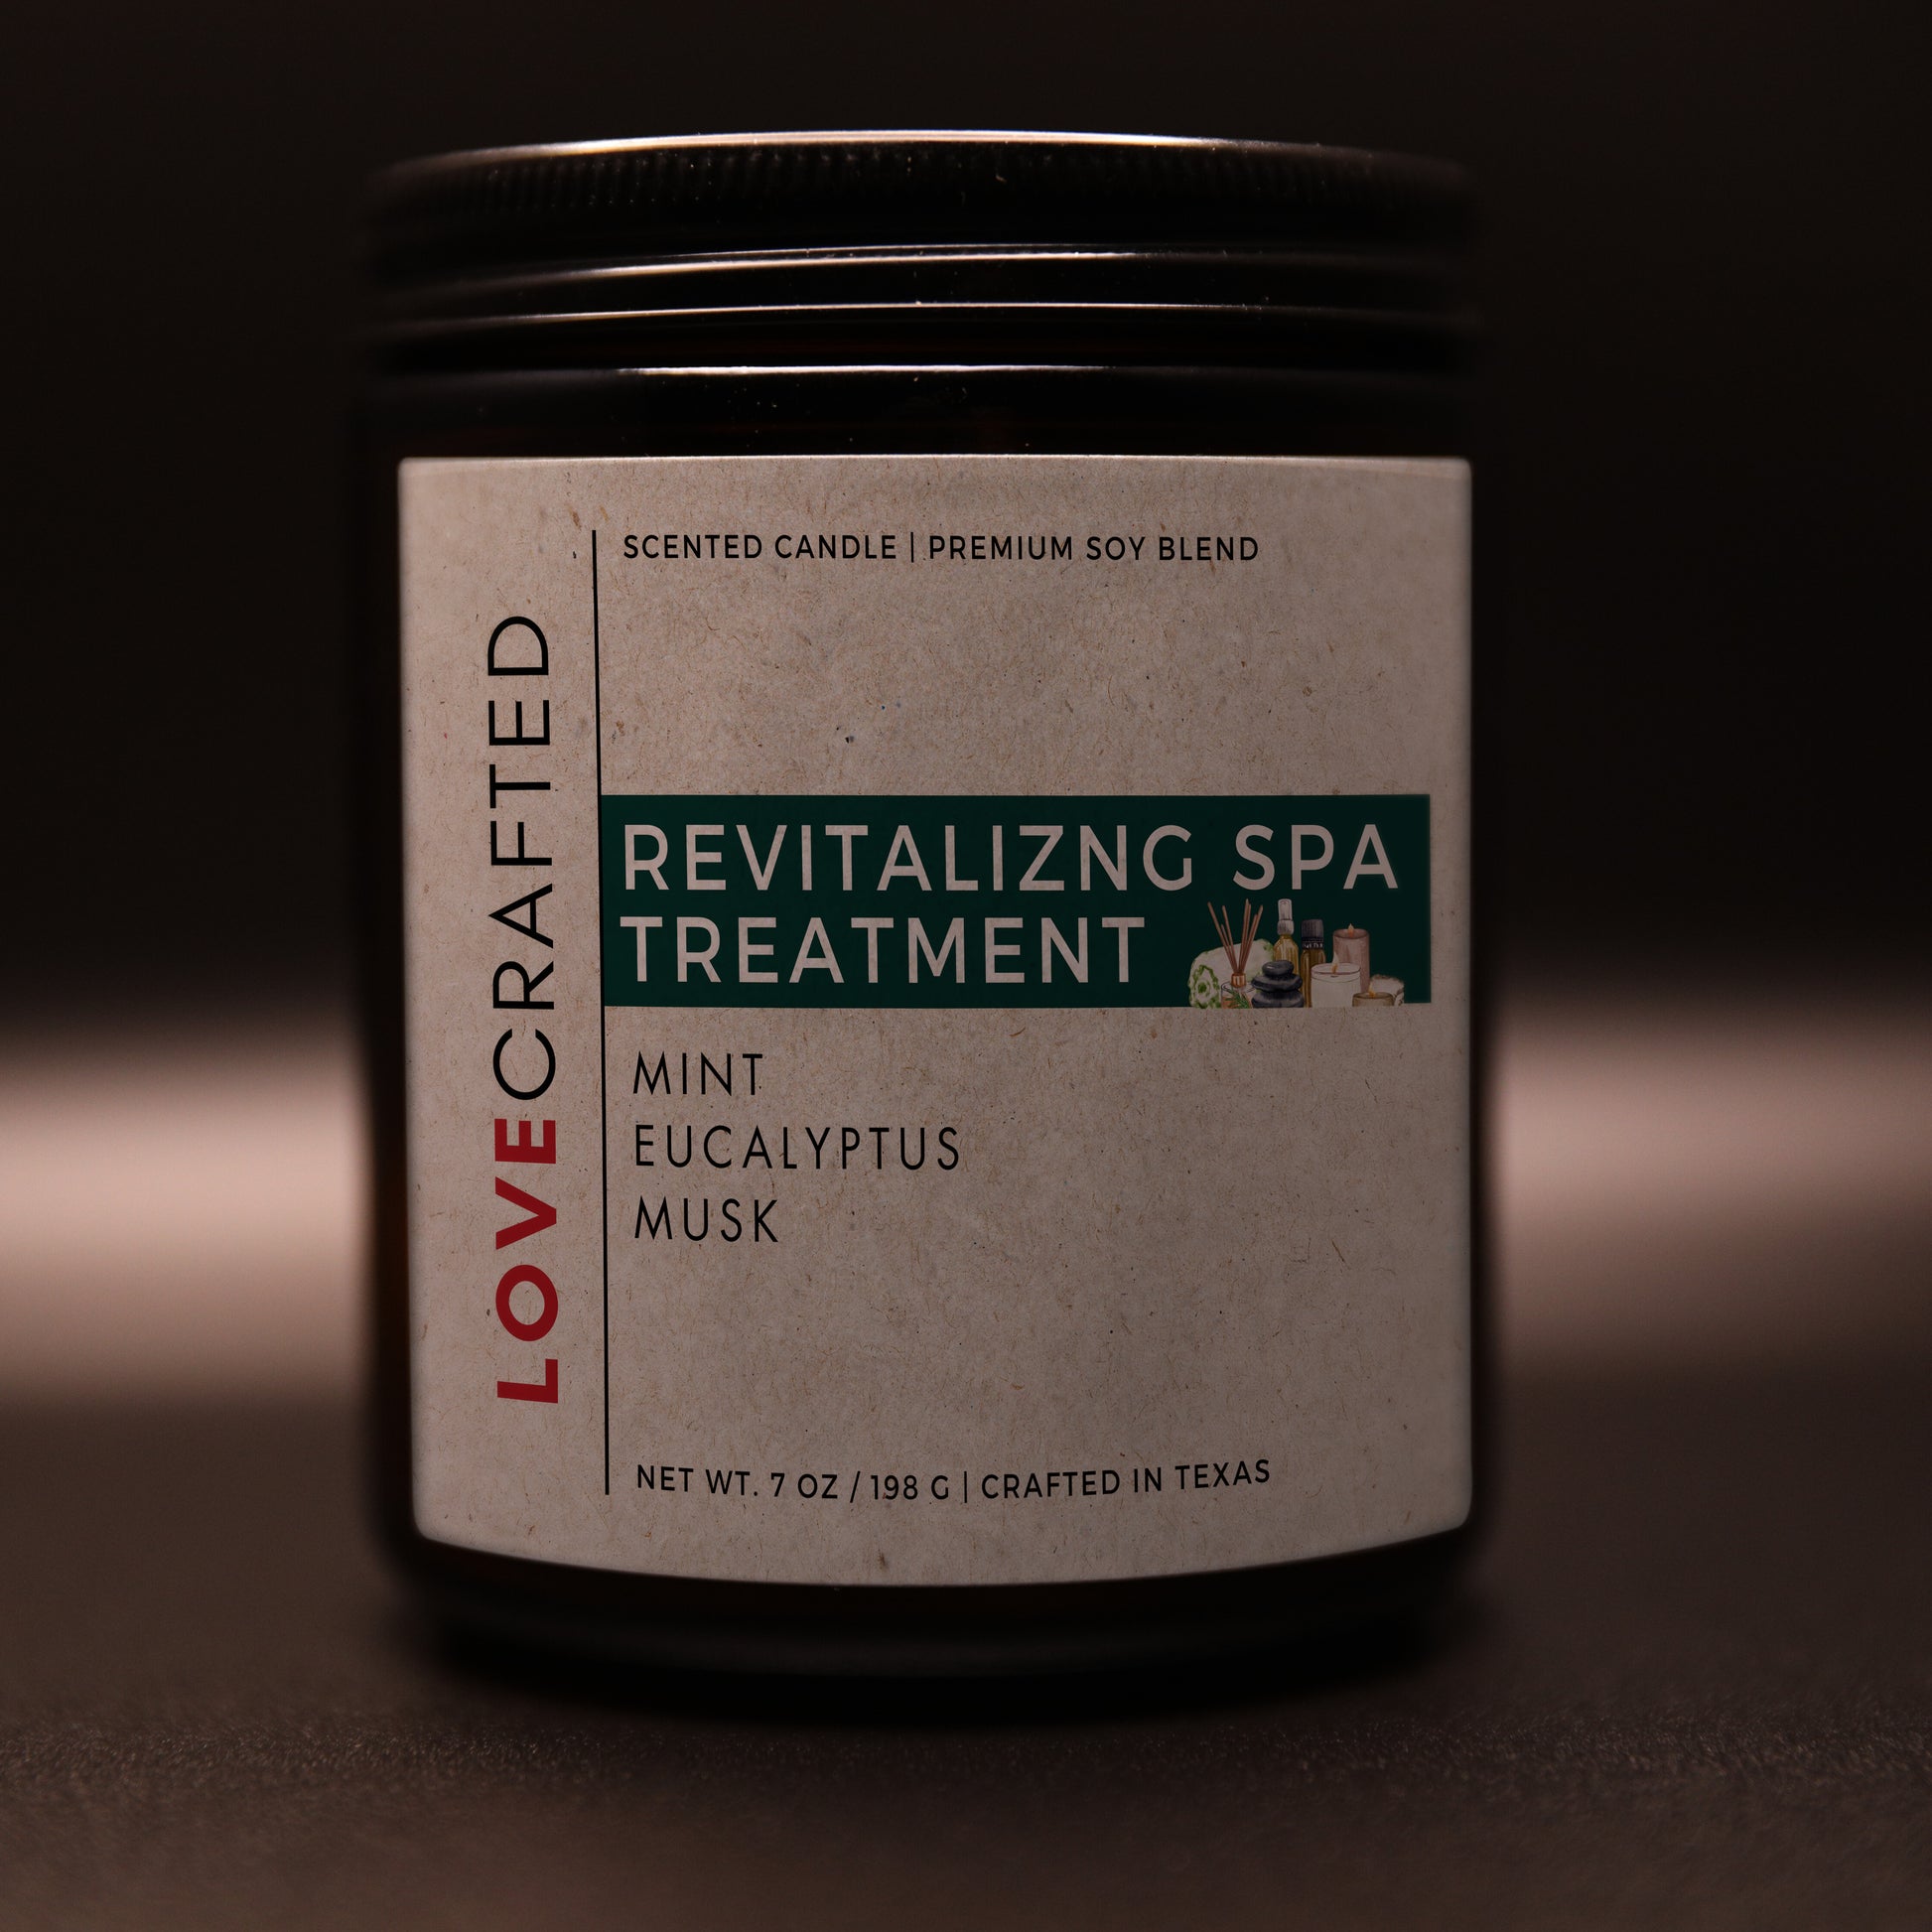 Revitalizing Spa Treatment, a Fresh and Clean Lovecrafted Candle